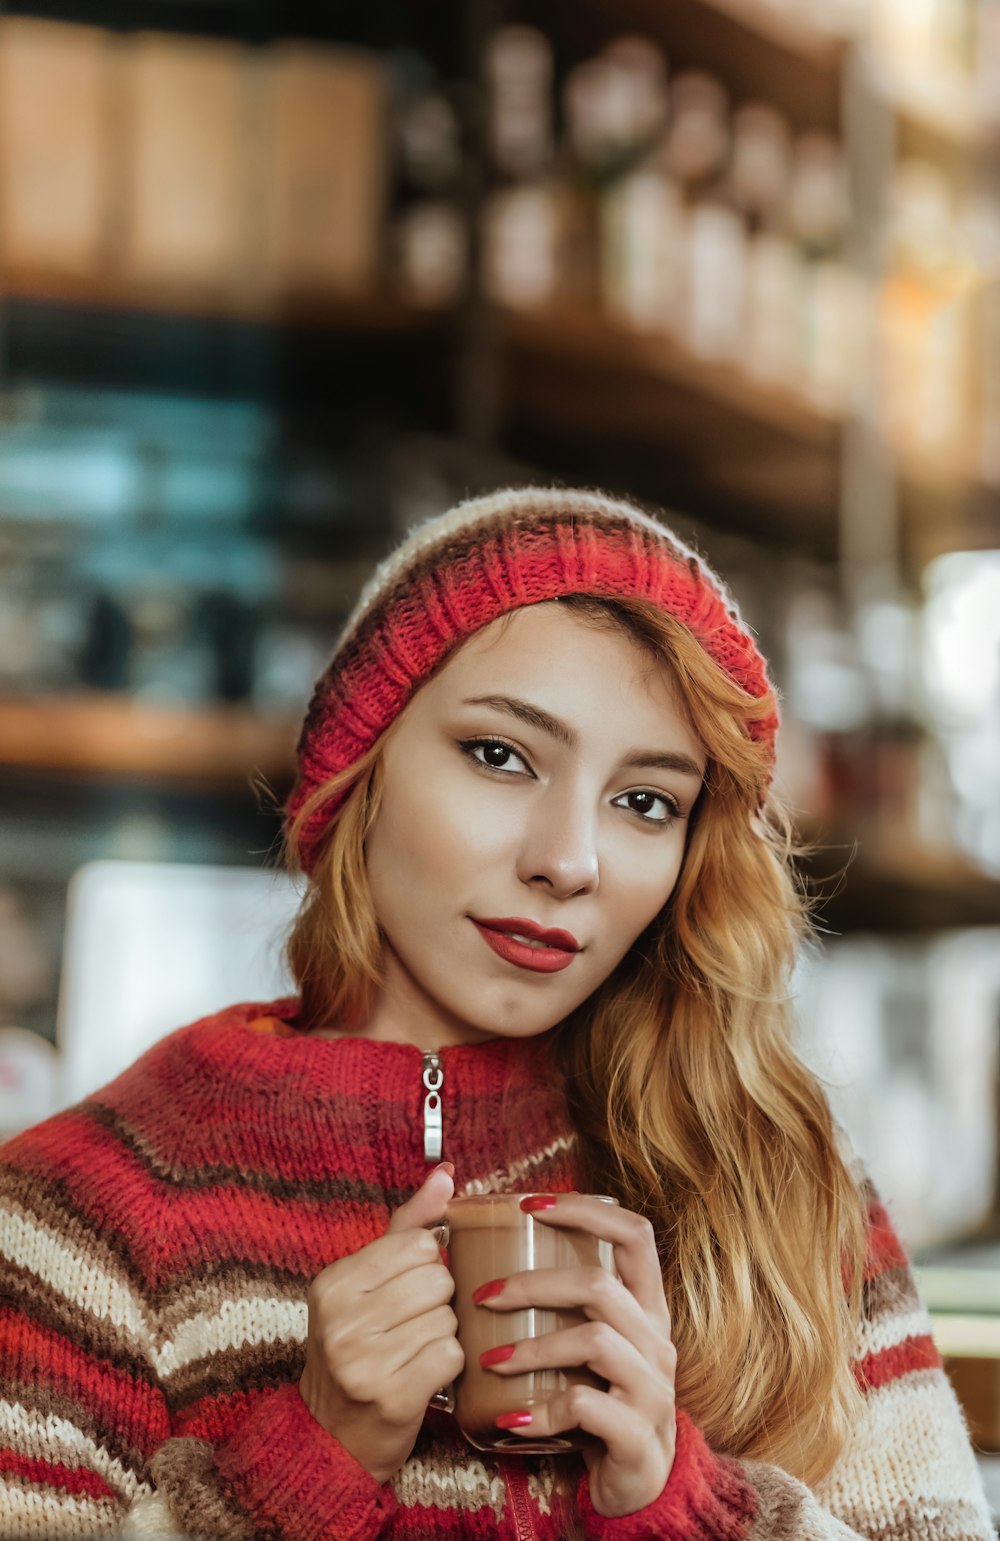 woman in red knit cap and red knit sweater